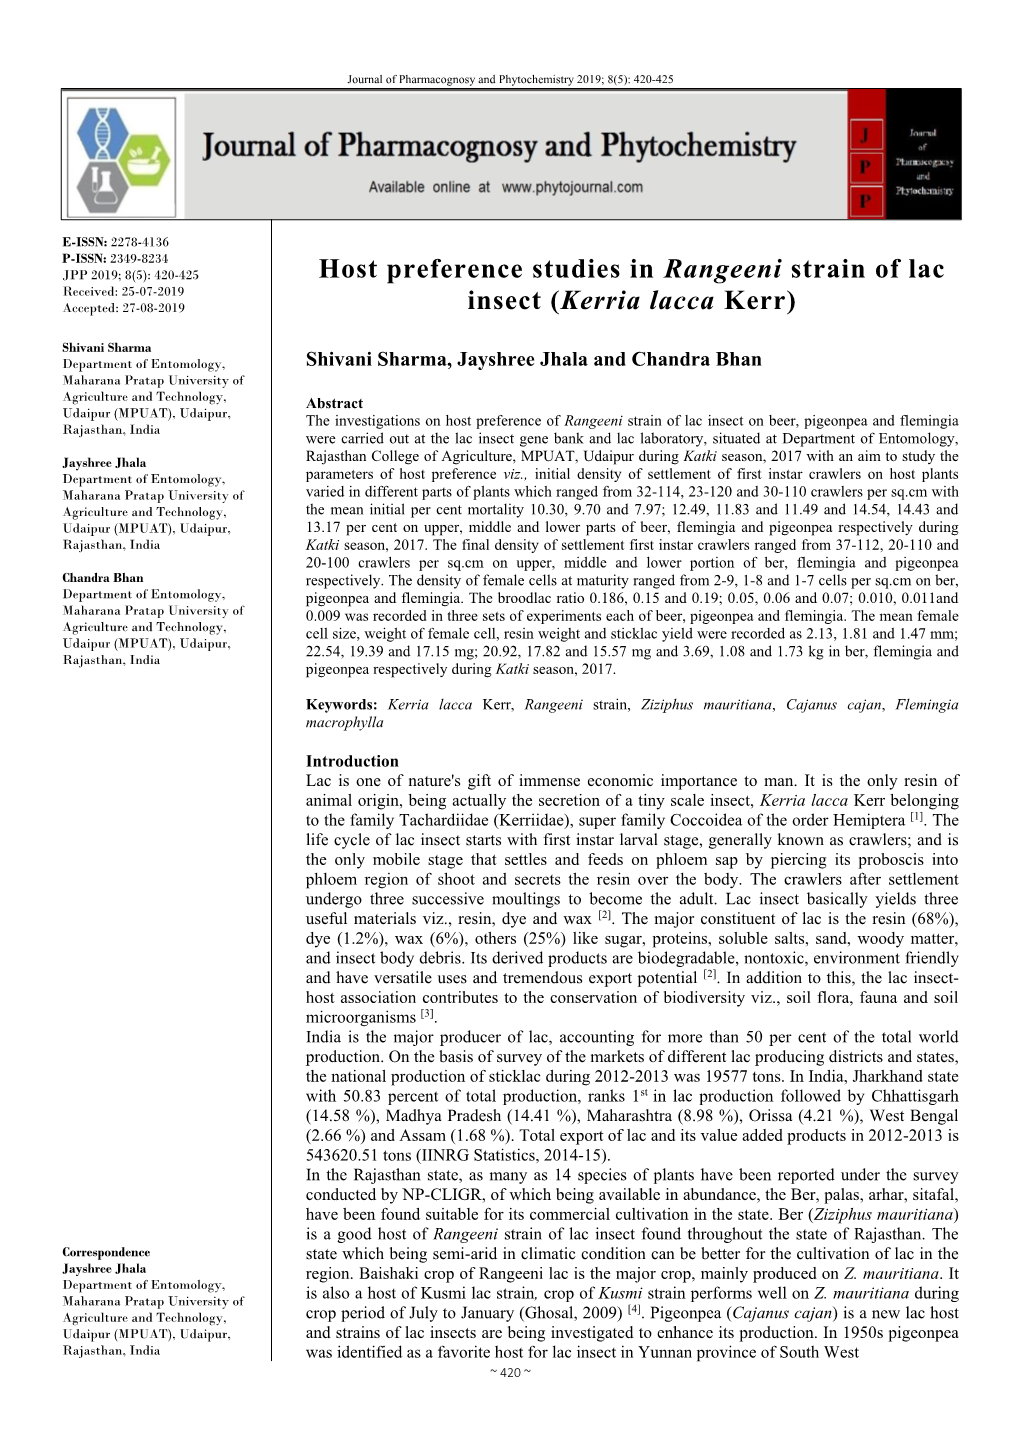 Host Preference Studies in Rangeeni Strain of Lac Insect (Kerria Lacca Kerr)